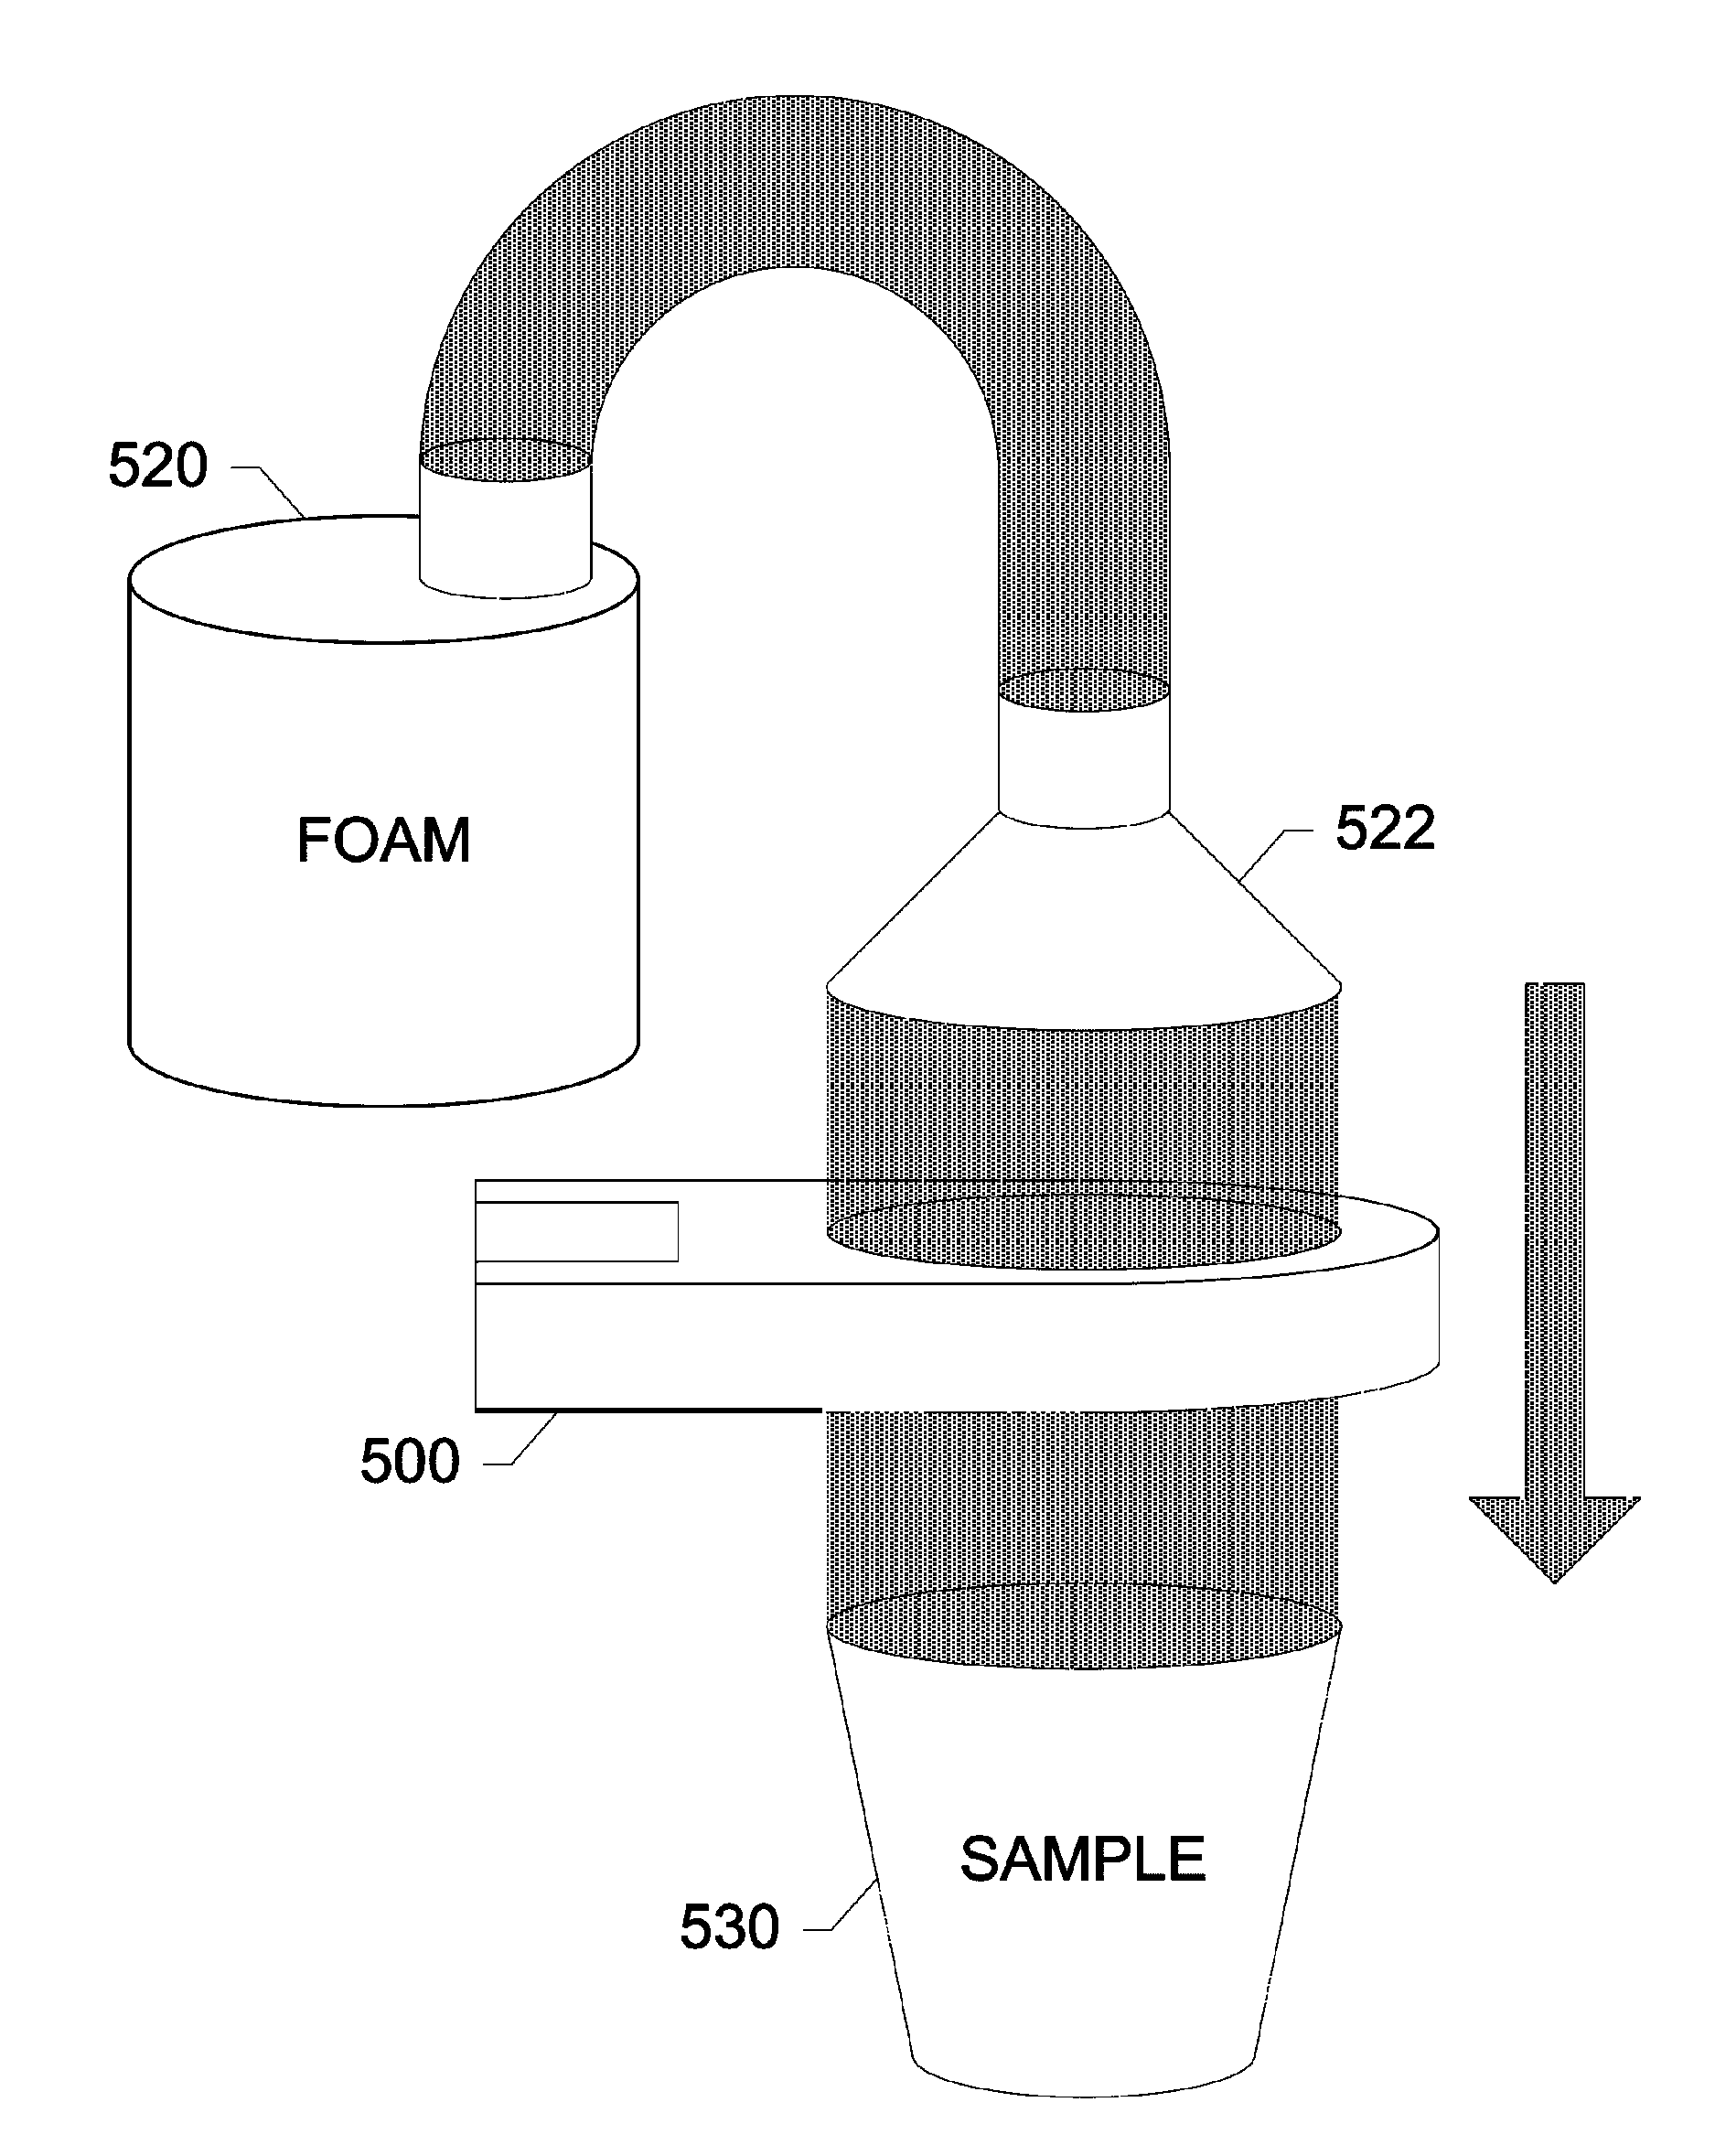 Devices, systems and methods for elution of particles from flat filters